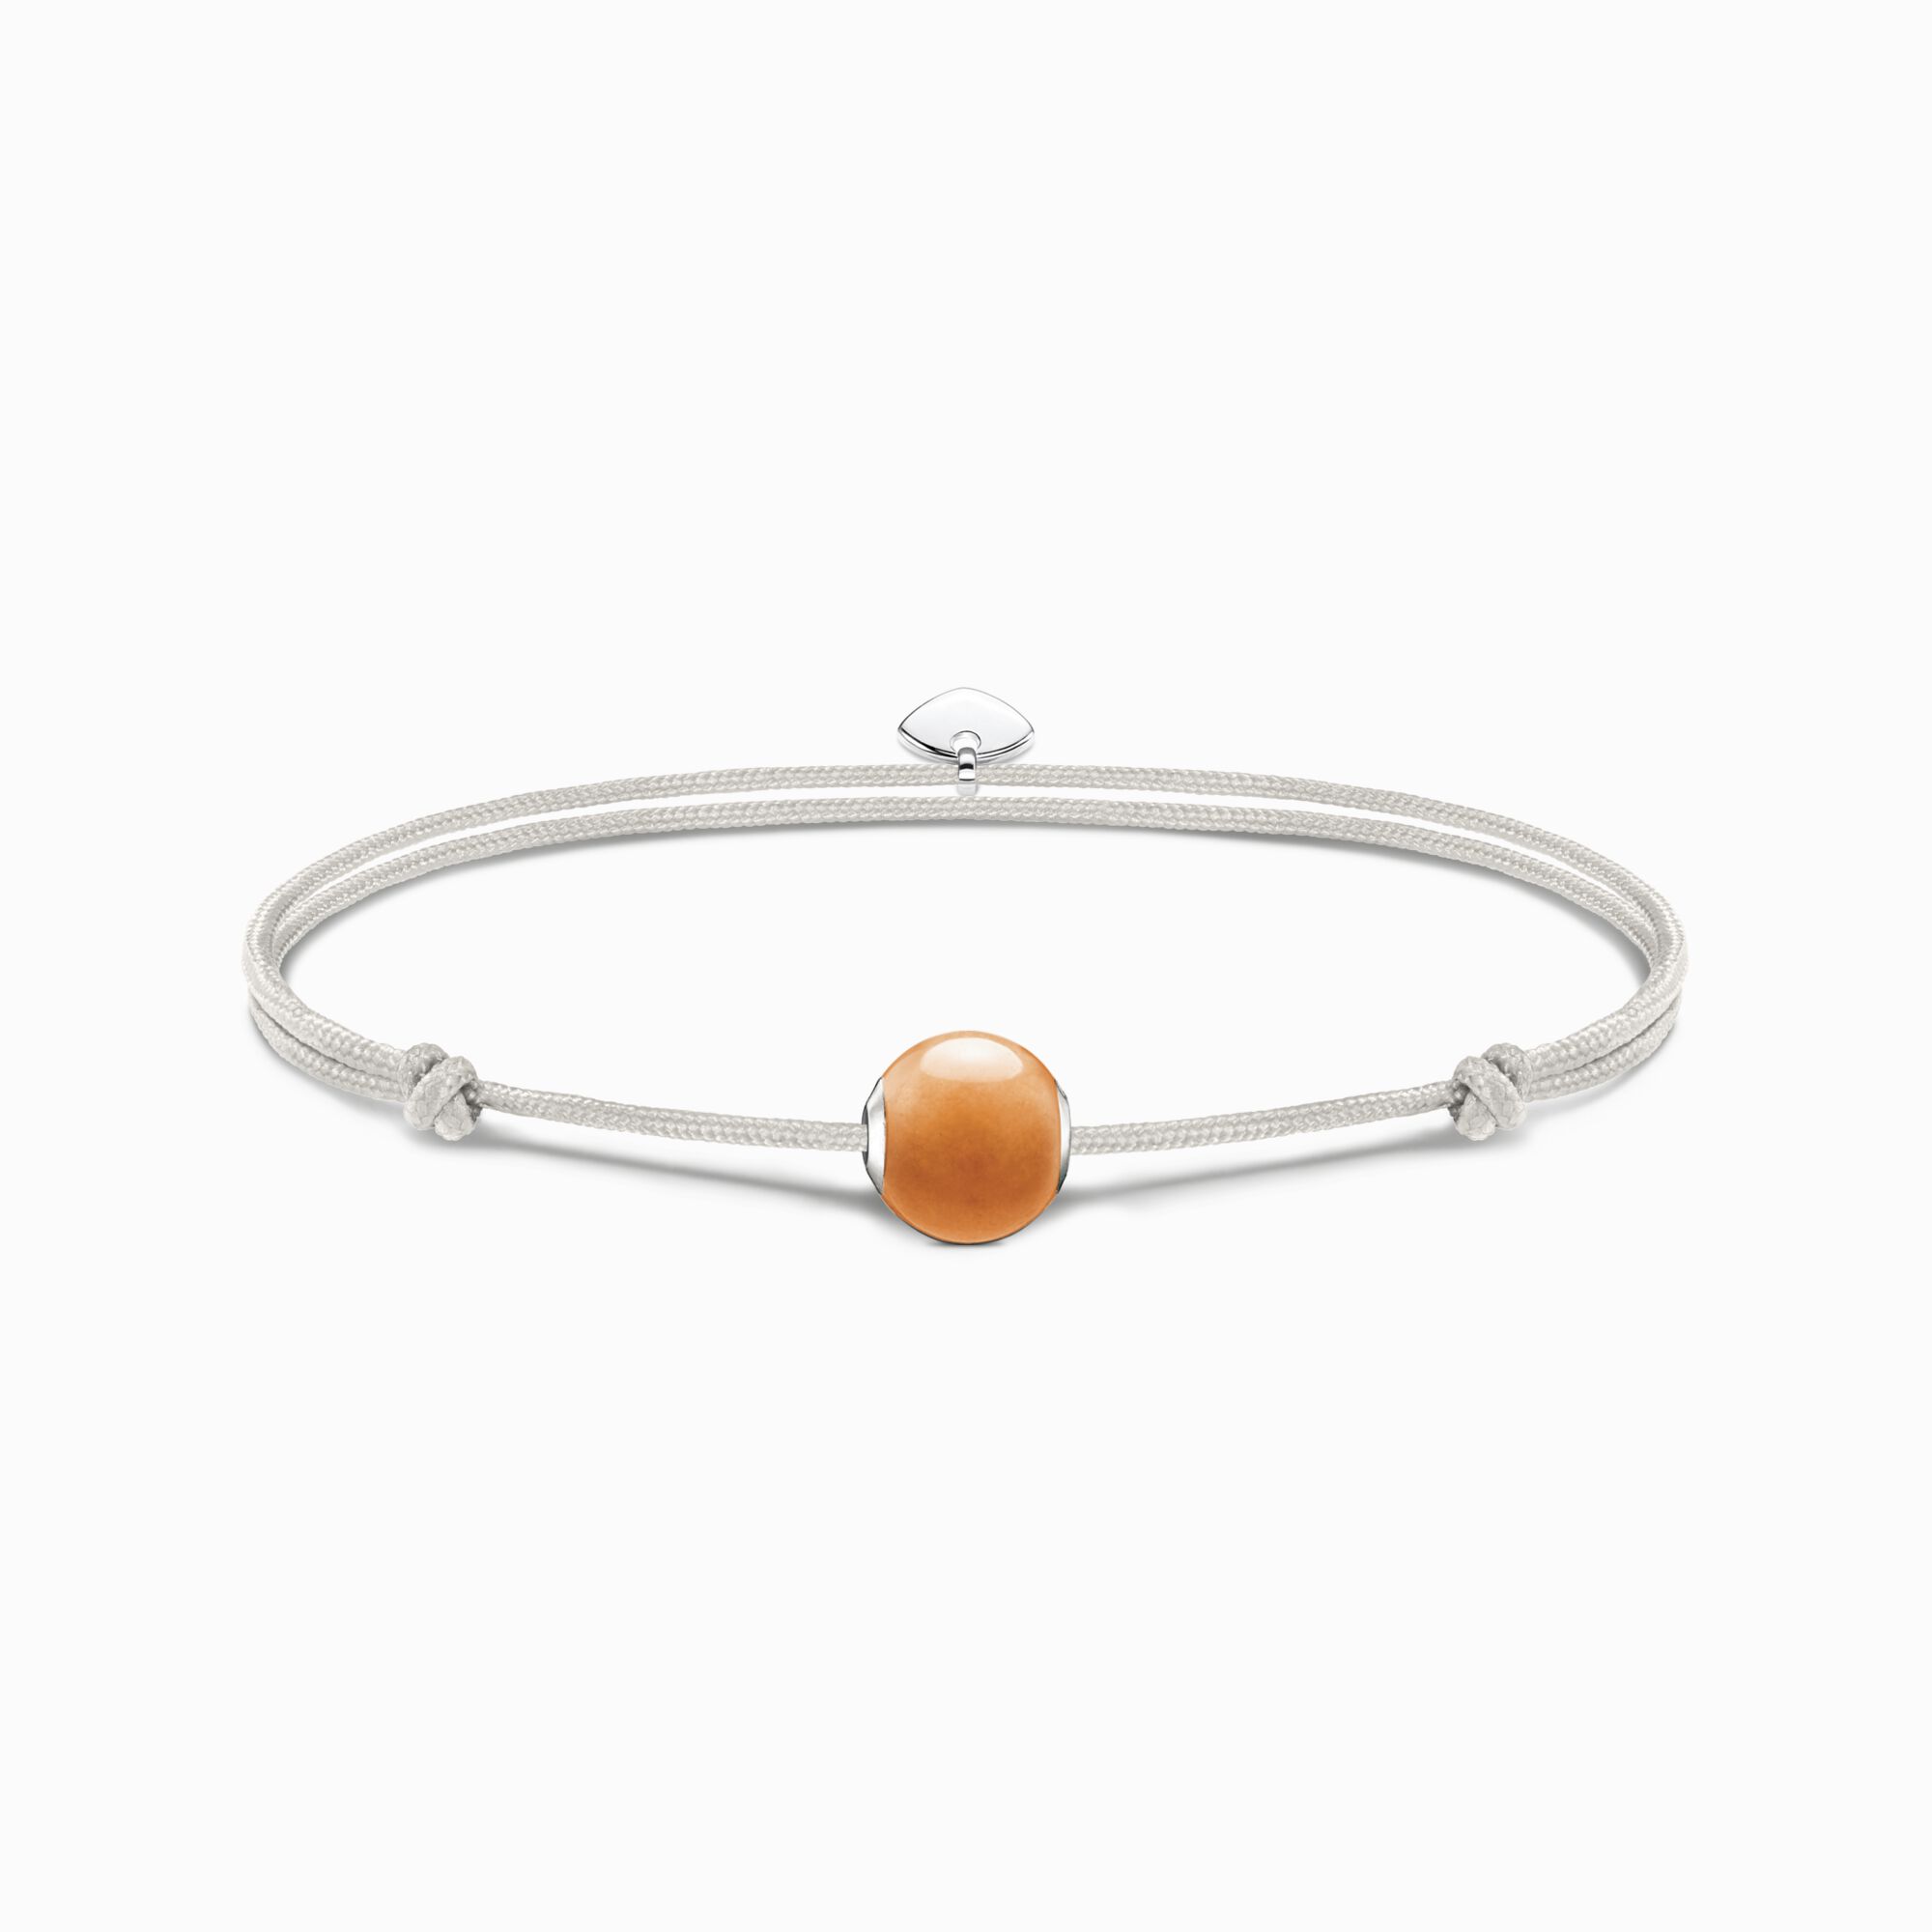 Bracelet Karma Secret with red aventurine Bead from the Karma Beads collection in the THOMAS SABO online store